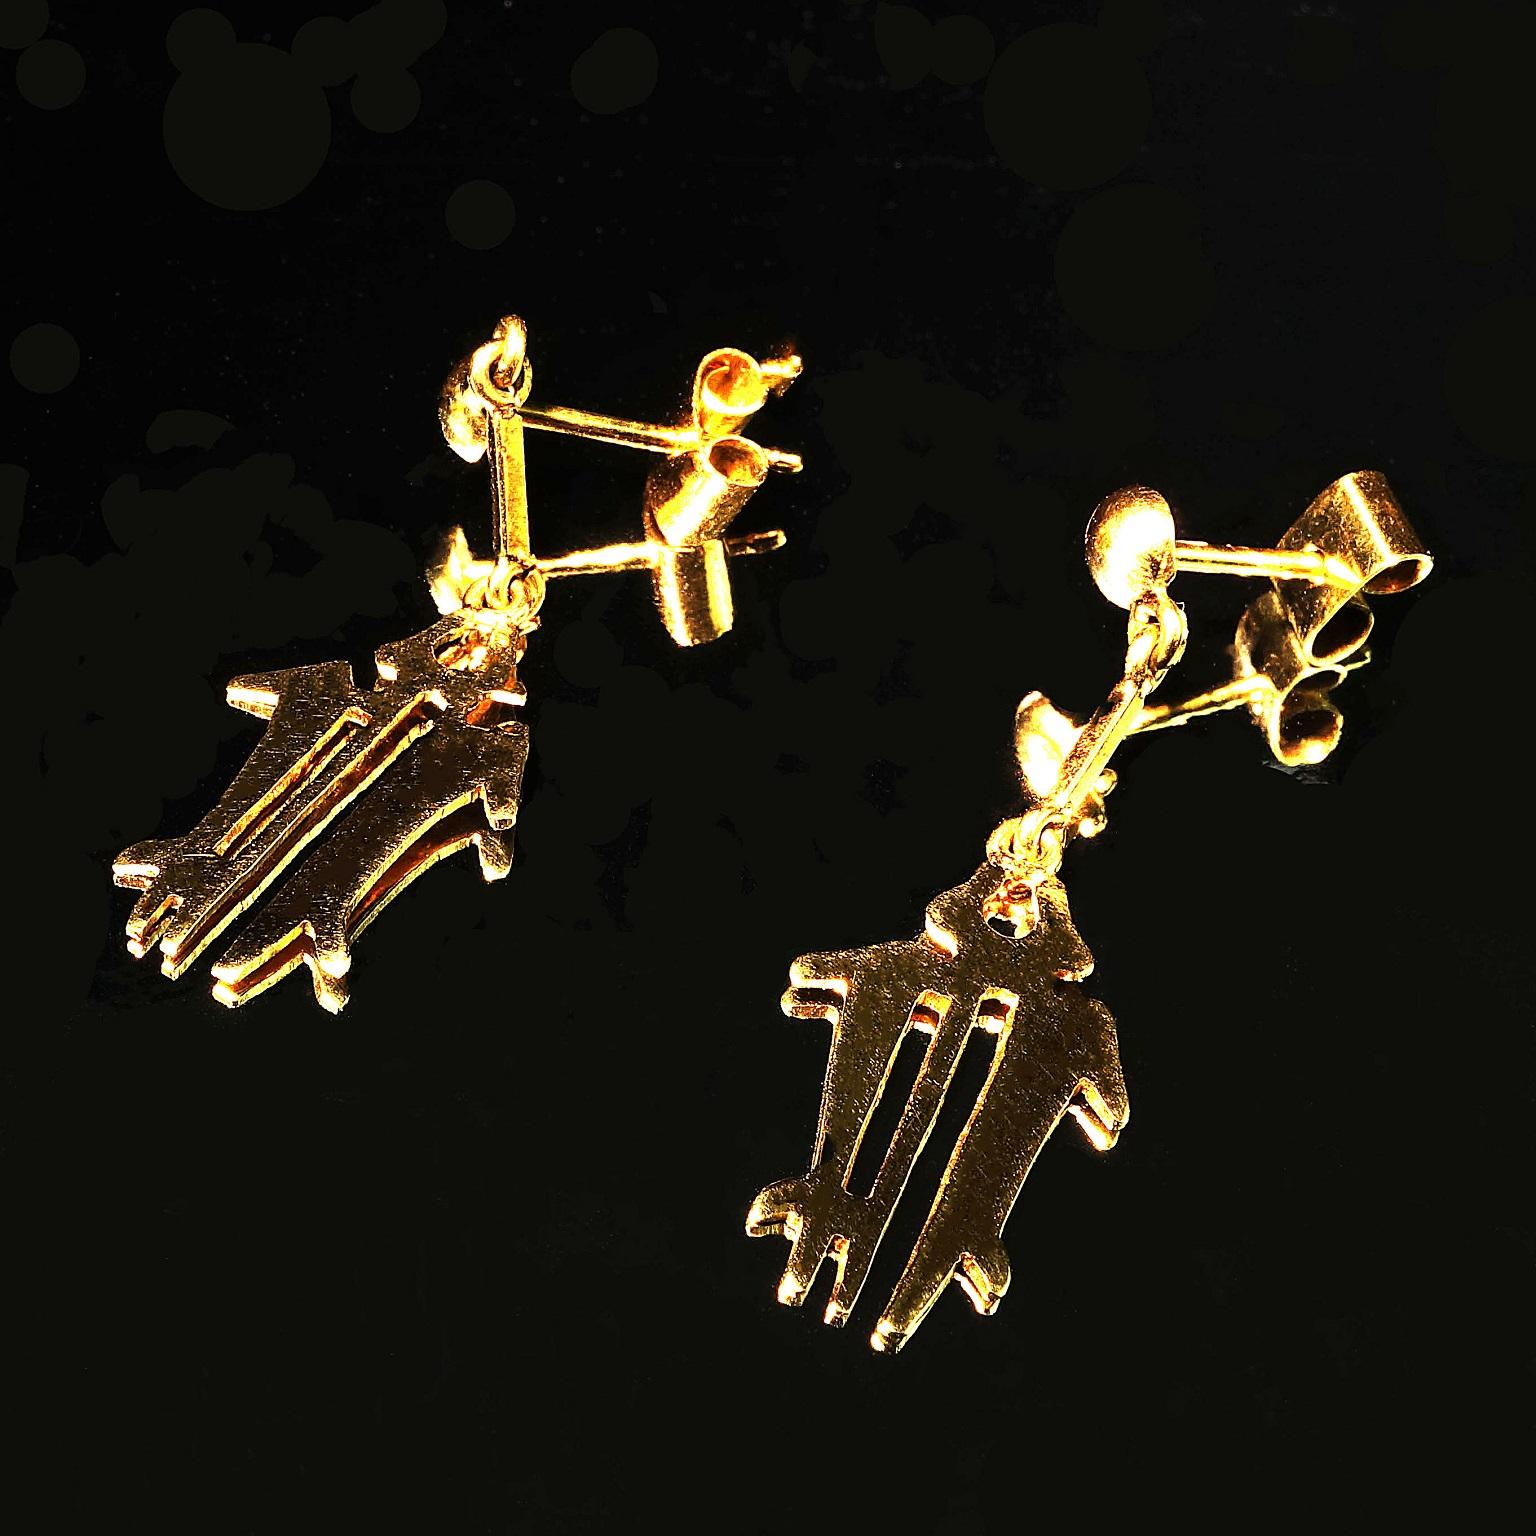 AJD 18 Karat Yellow Gold NAZCA Lines Earrings   Great Gift!! For Sale 1